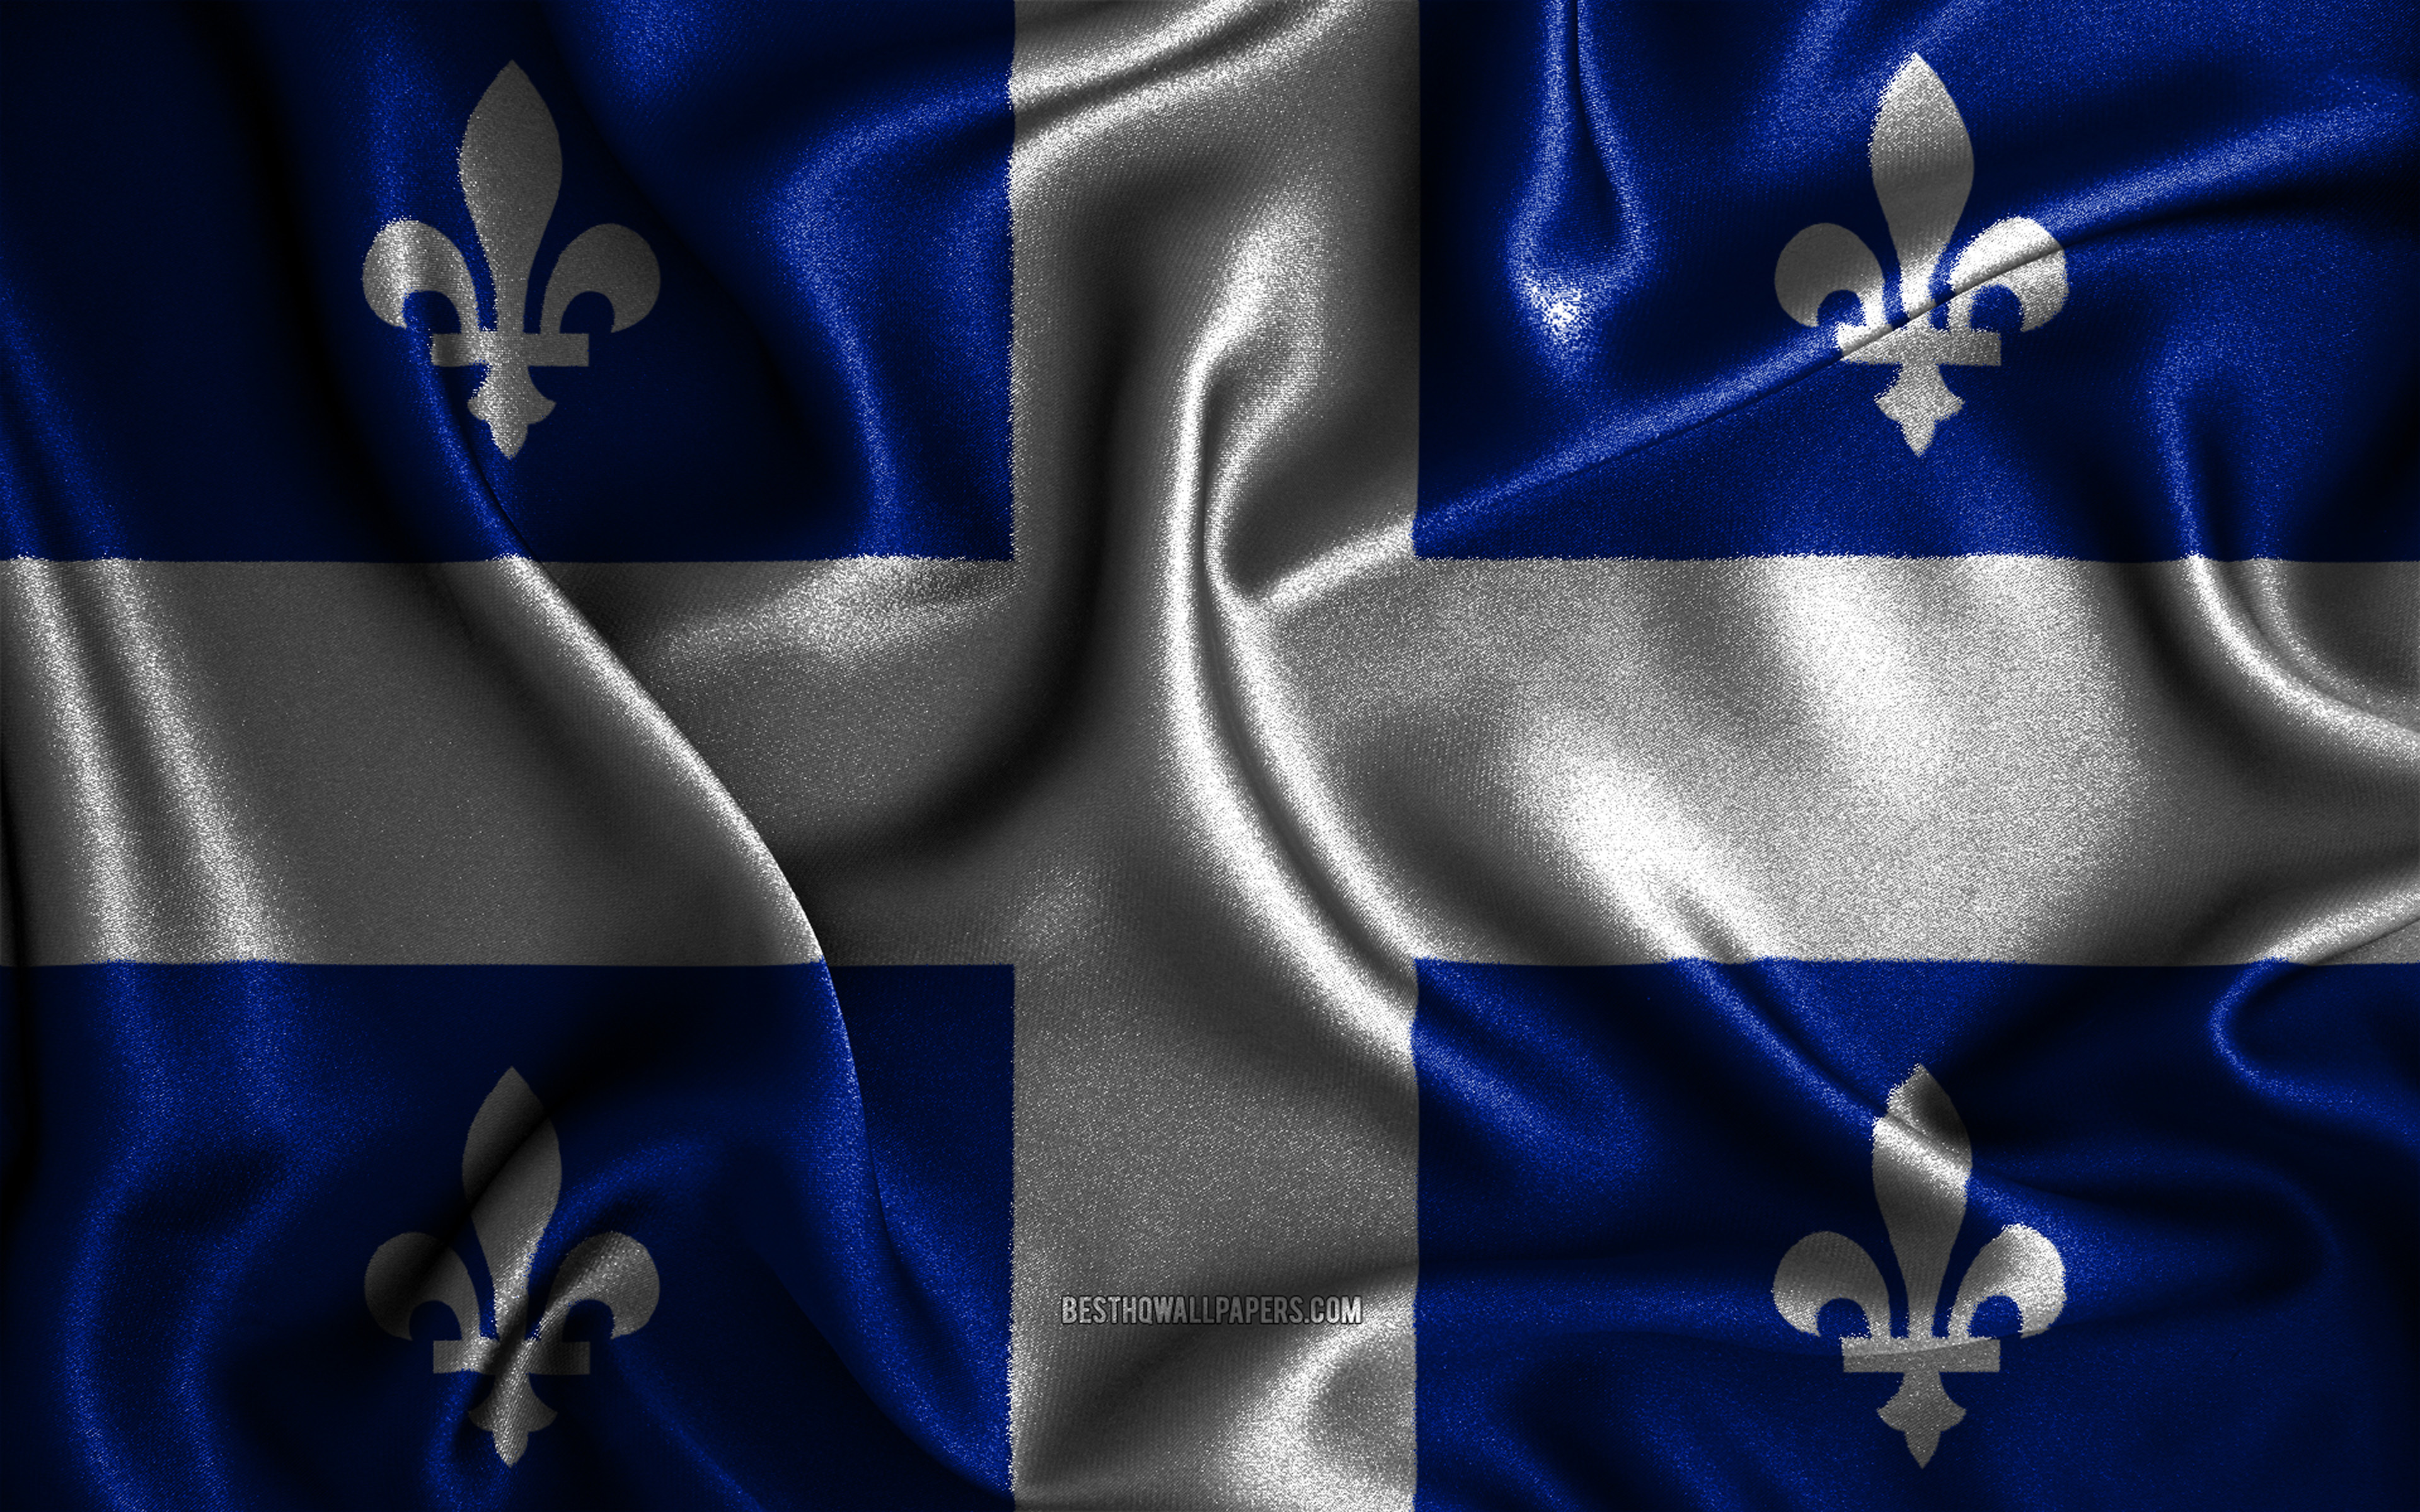 Download wallpaper Quebec flag, 4k, silk wavy flags, canadian provinces, Day of Quebec, fabric flags, Flag of Quebec, 3D art, Quebec, Provinces of Canada, Quebec 3D flag, Canada for desktop with resolution